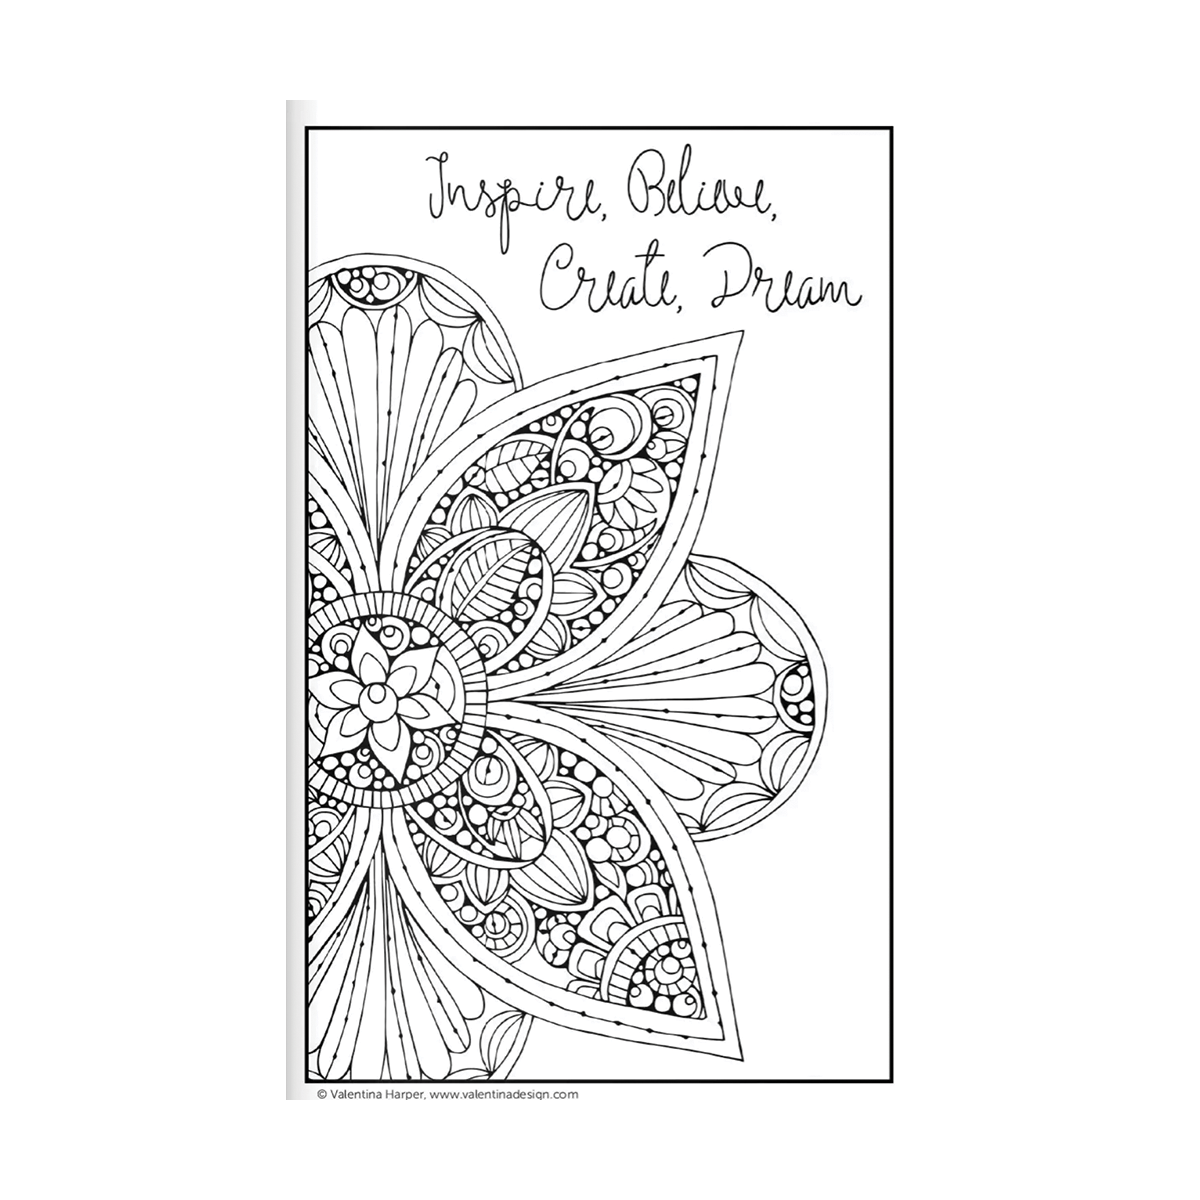 Color Relax Coloring Book